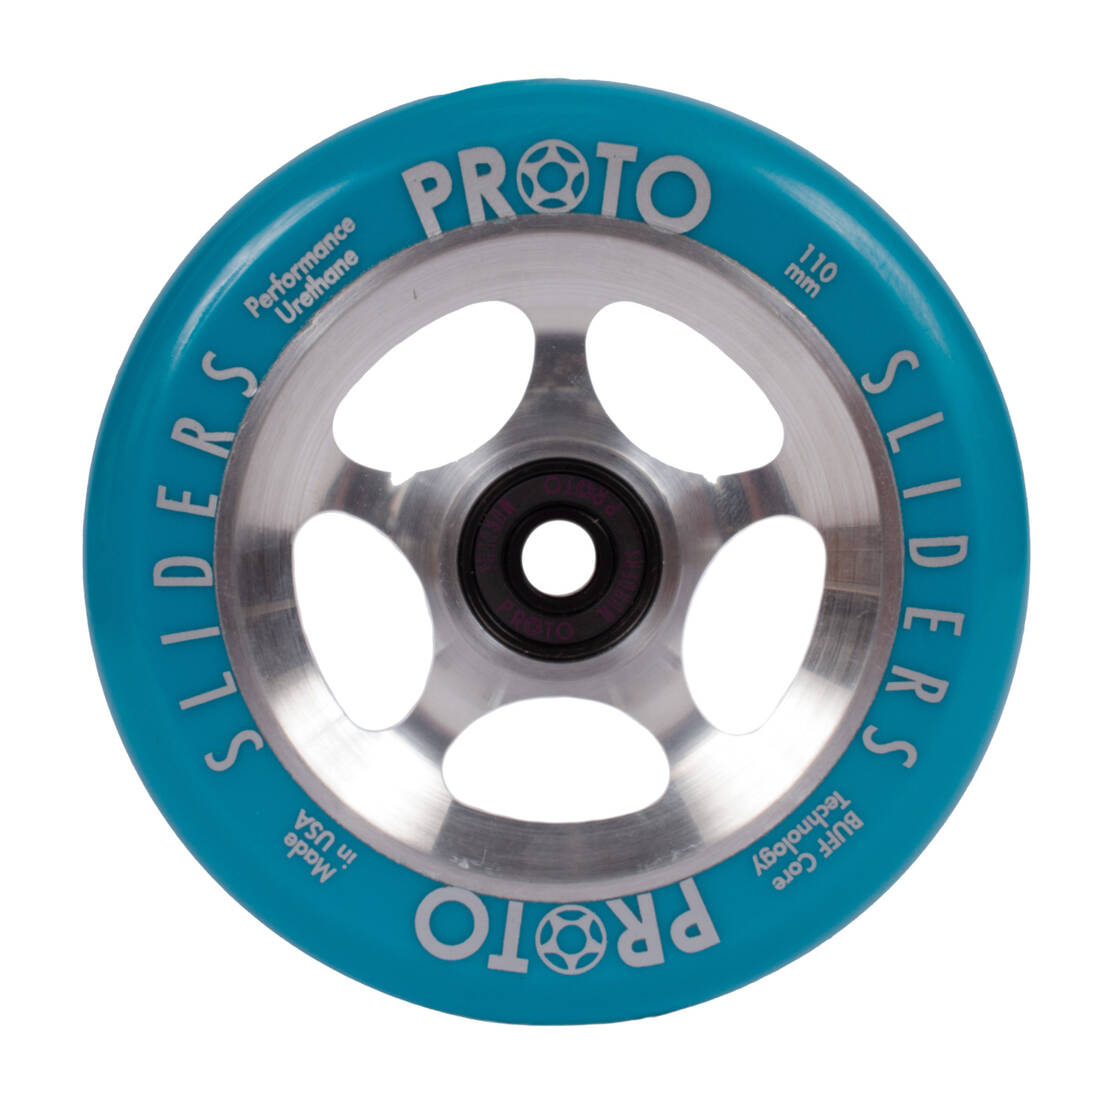 An image of Proto Sliders Starbright 110mm Pro Scooter Wheel - Blue / Raw